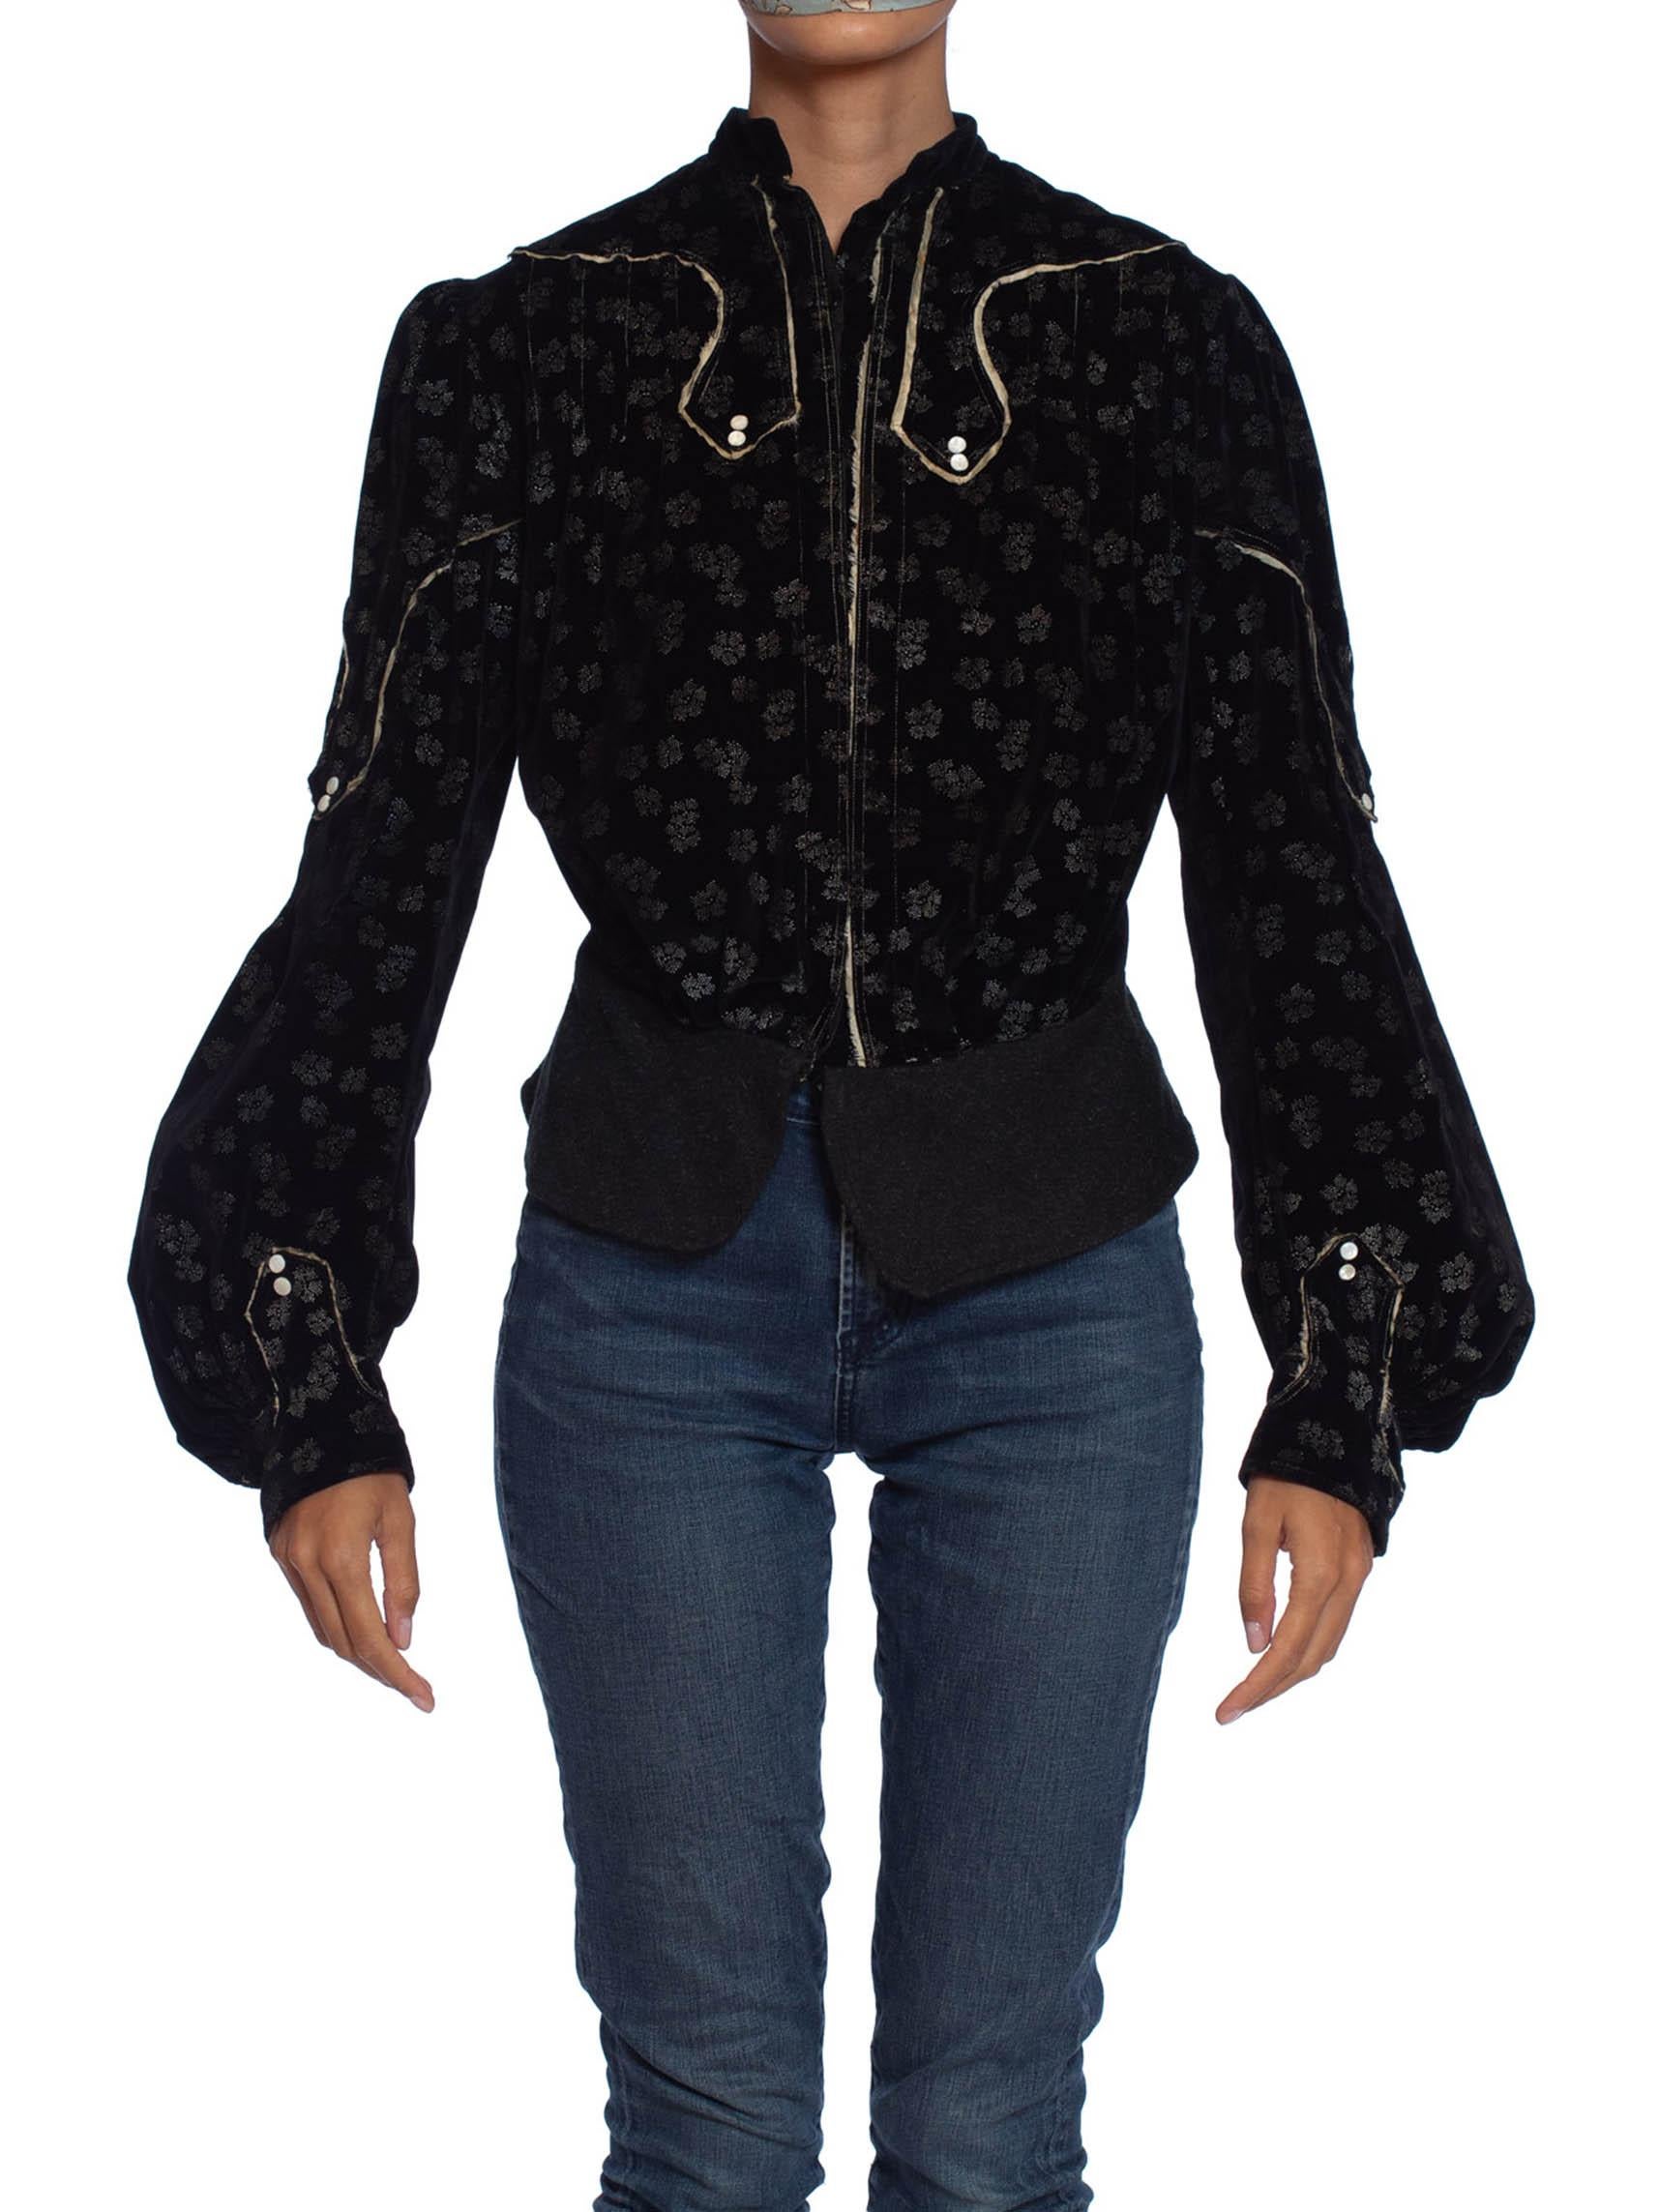 Strong and wearable condition for the age, does show some signs of age around the edges.  Edwardian Black Printed Silk Blend Velvet Jacket Top With Piping 